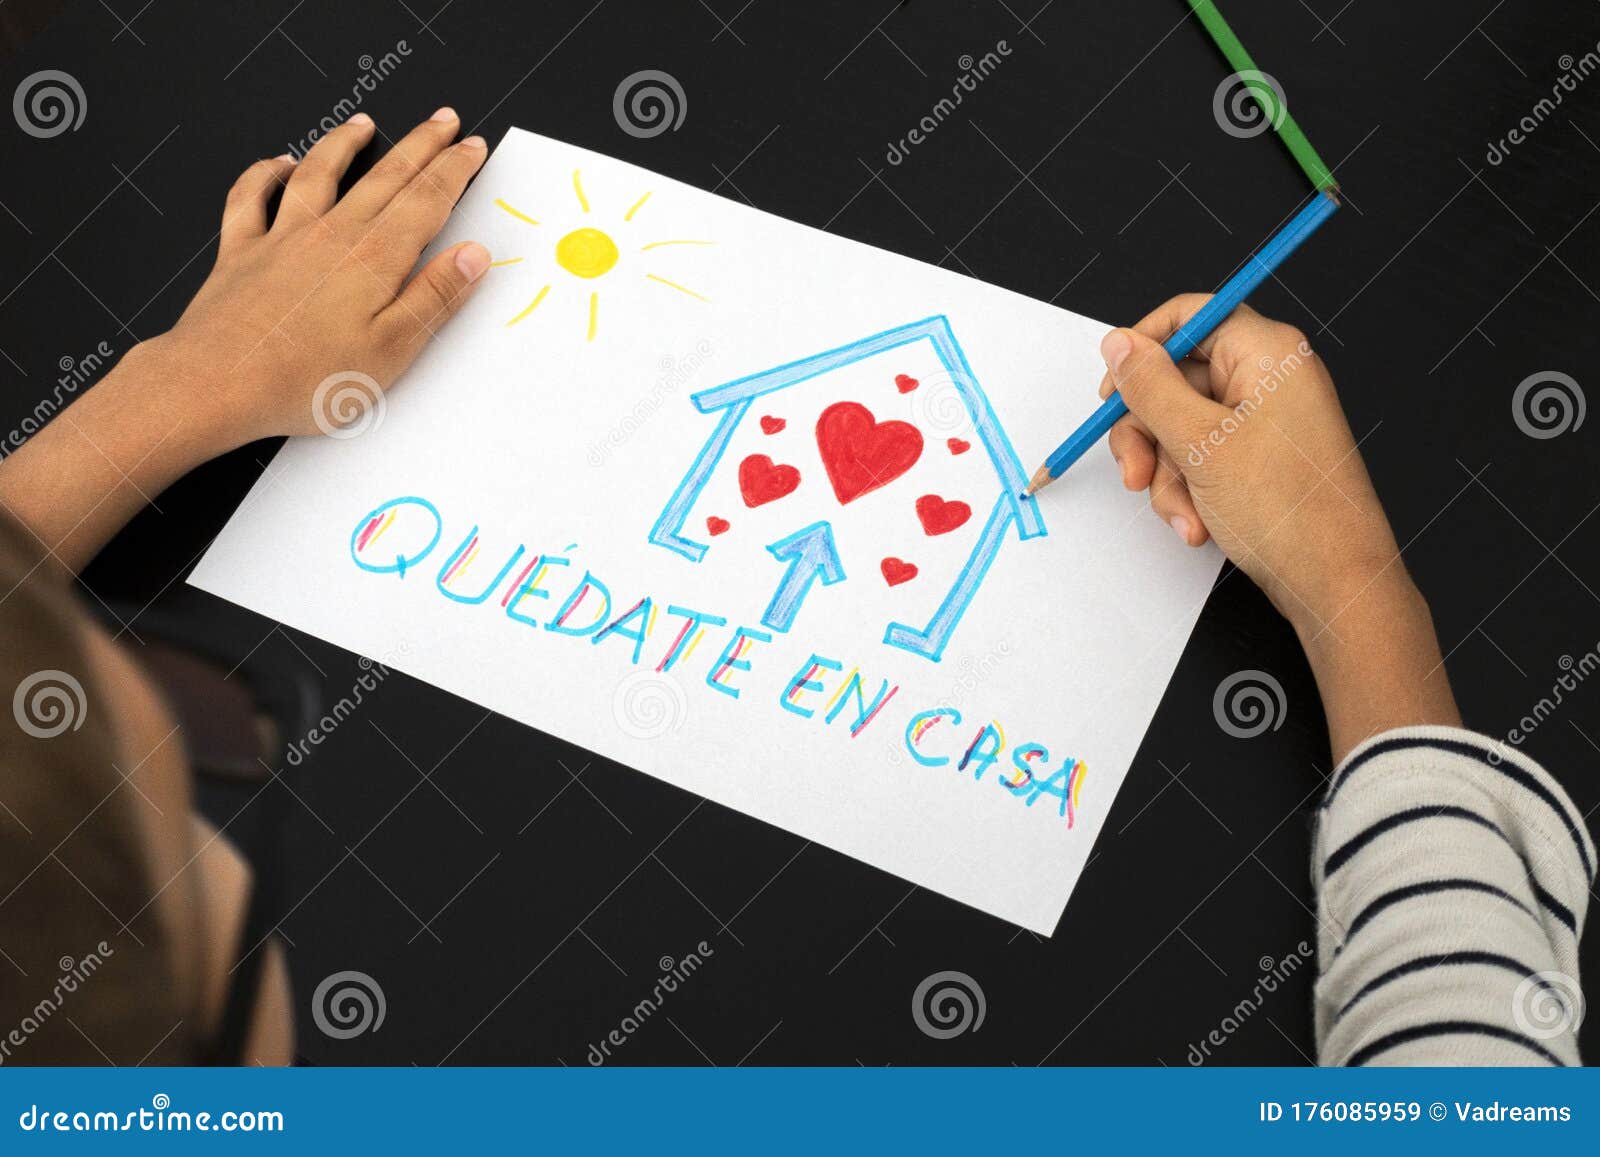 quarantine in spain. kid hand draw picture with spanish words quedate en casa - stay at home